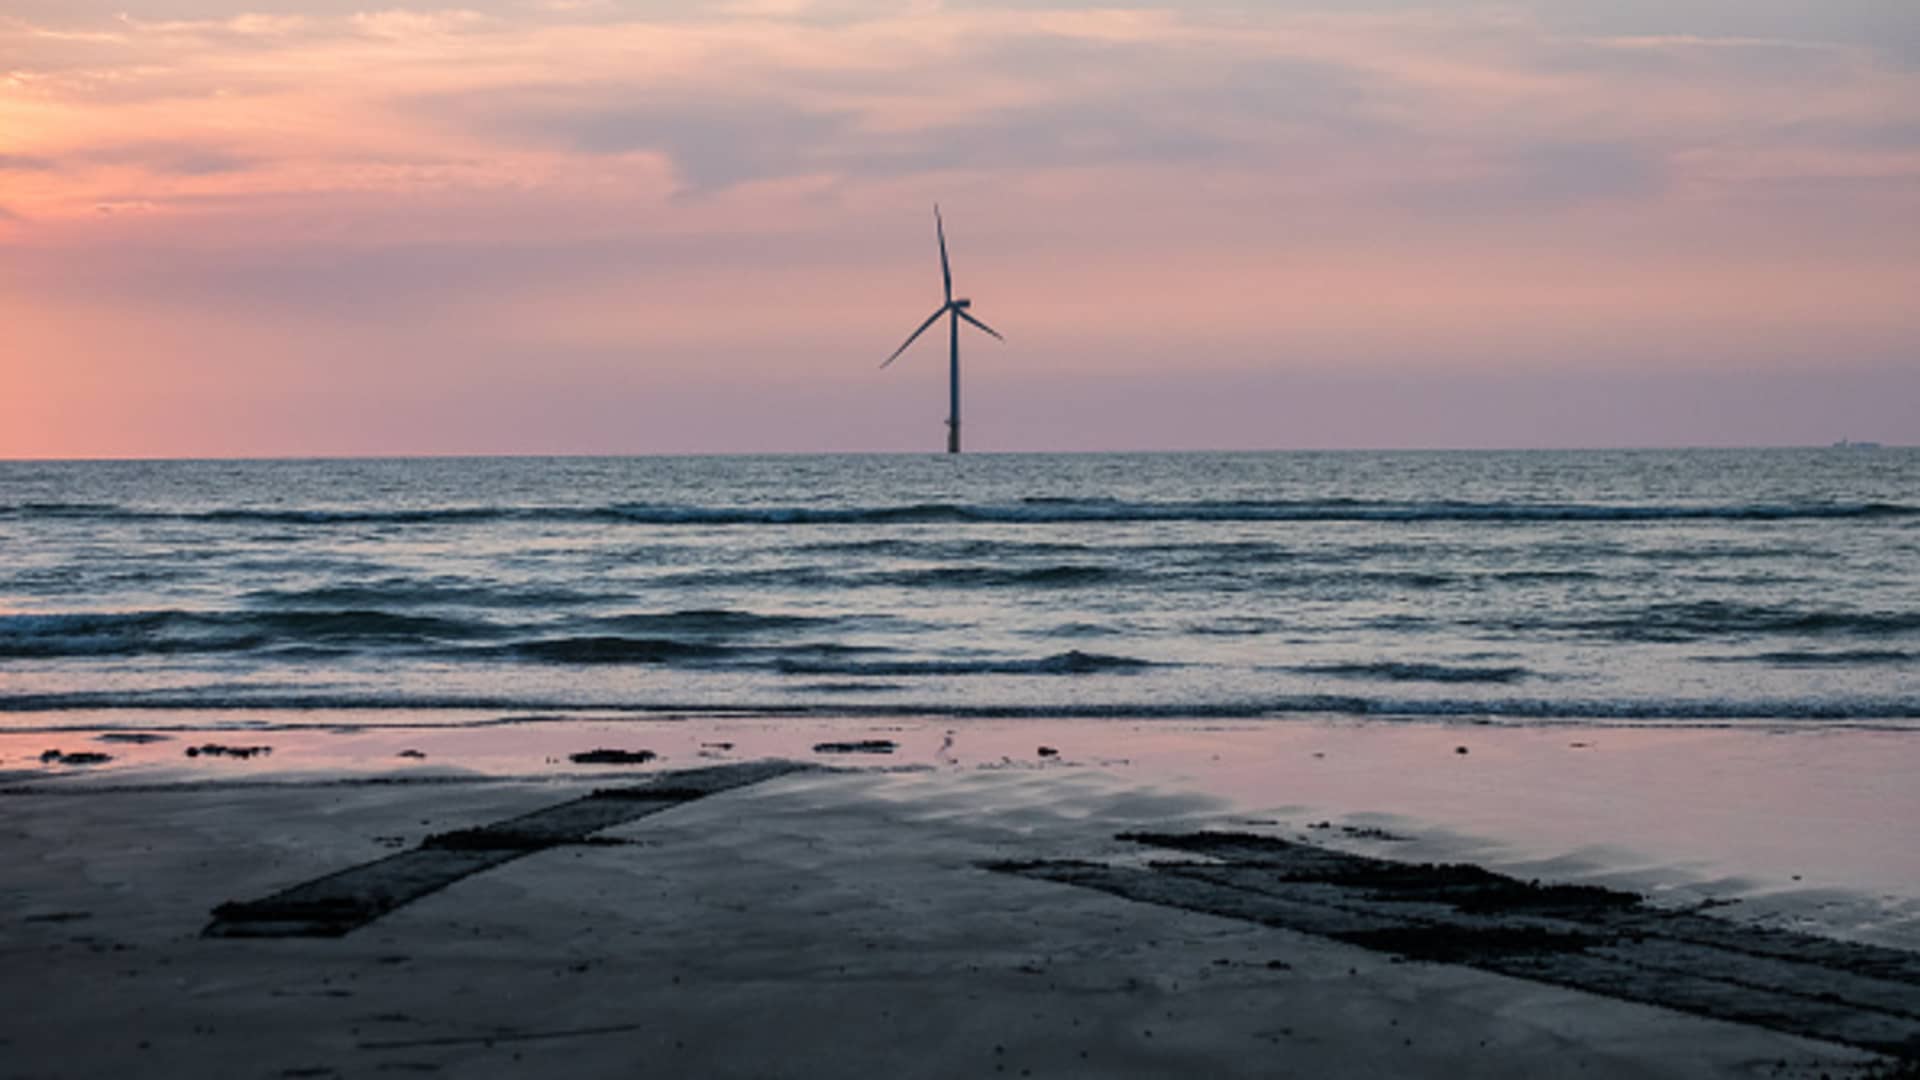 Taiwan’s ‘largest offshore wind farm’ generates its first energy